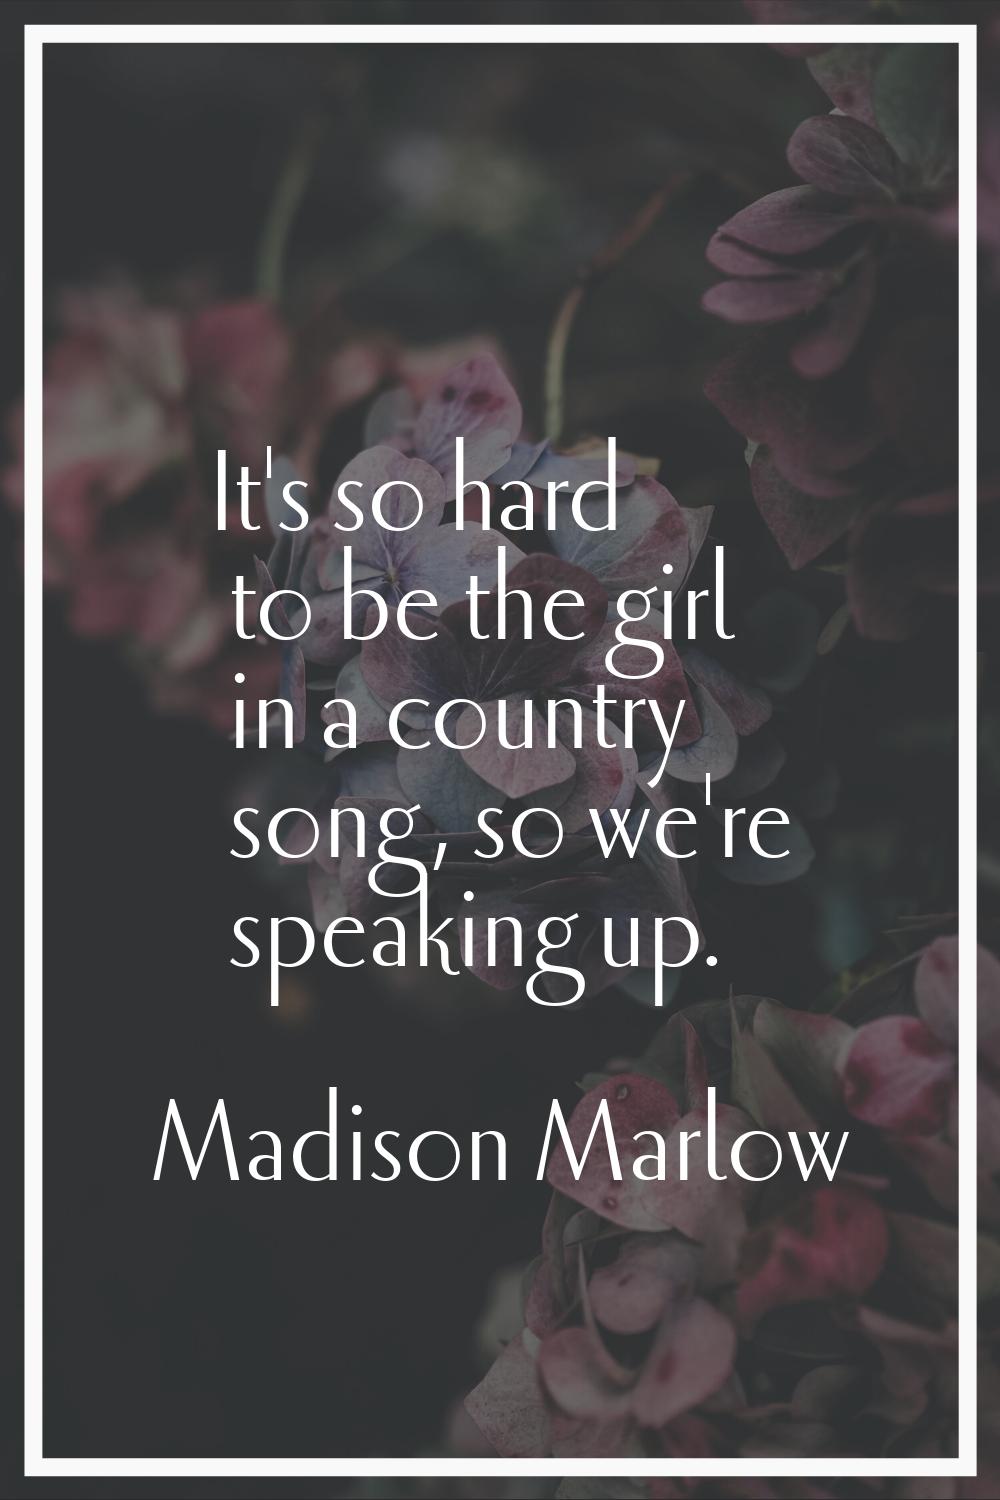 It's so hard to be the girl in a country song, so we're speaking up.